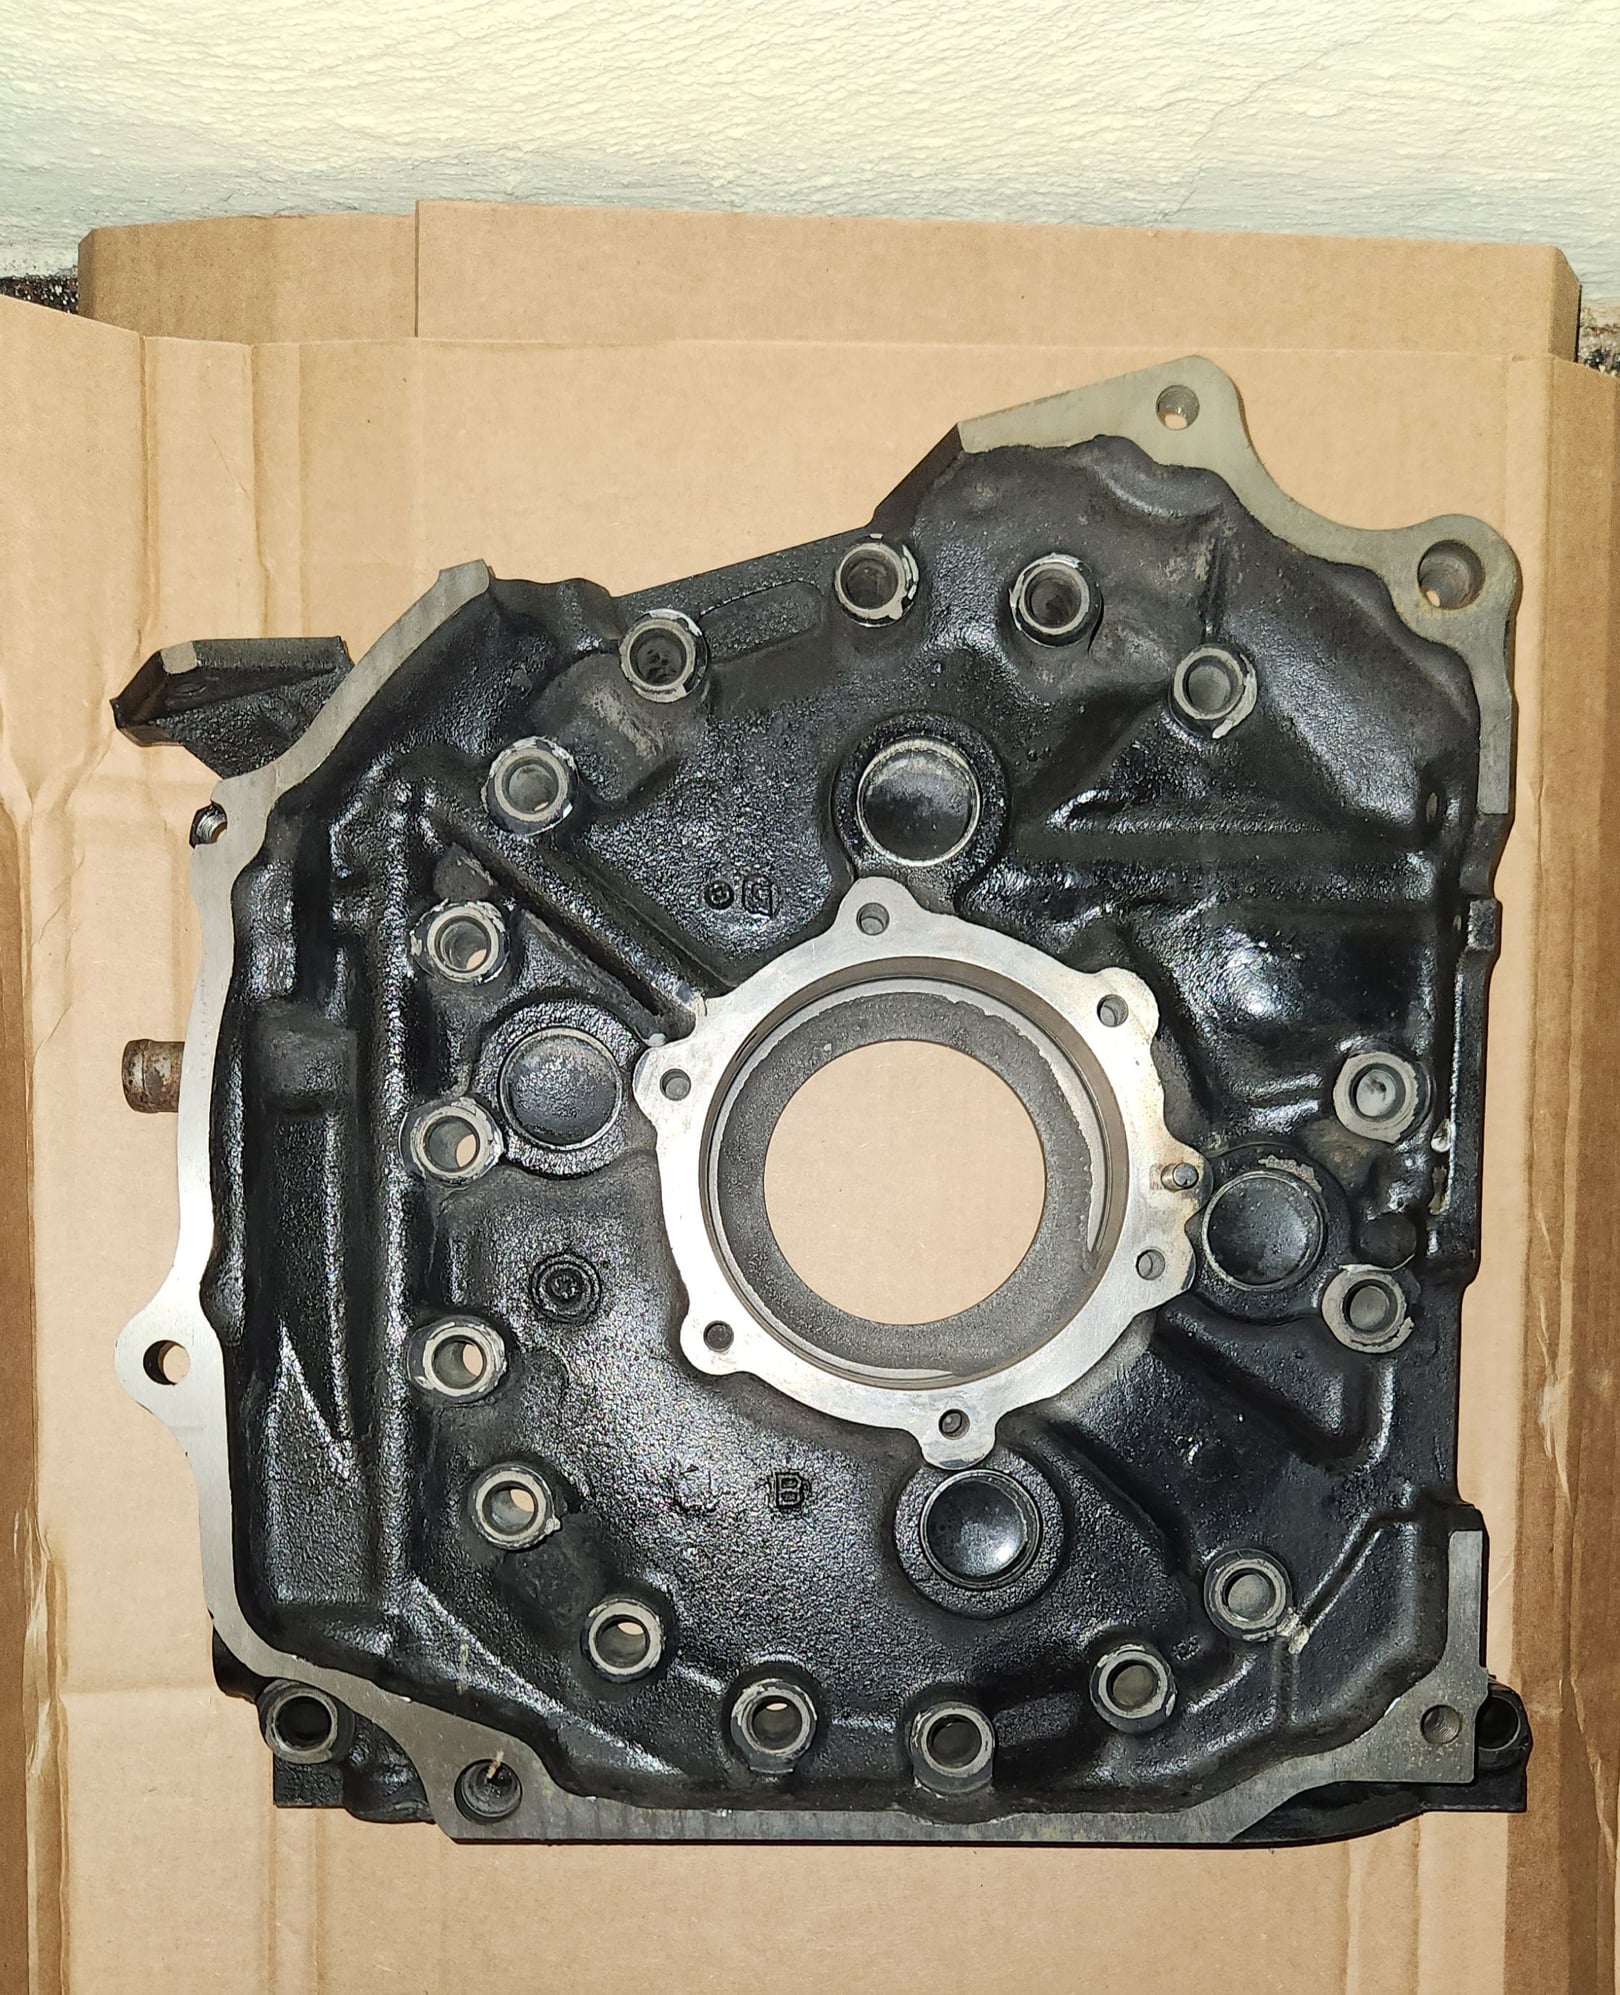 Engine - Intake/Fuel - S5 TII irons - Used - 1987 to 1991 Mazda RX-7 - Annapolis, MD 21401, United States